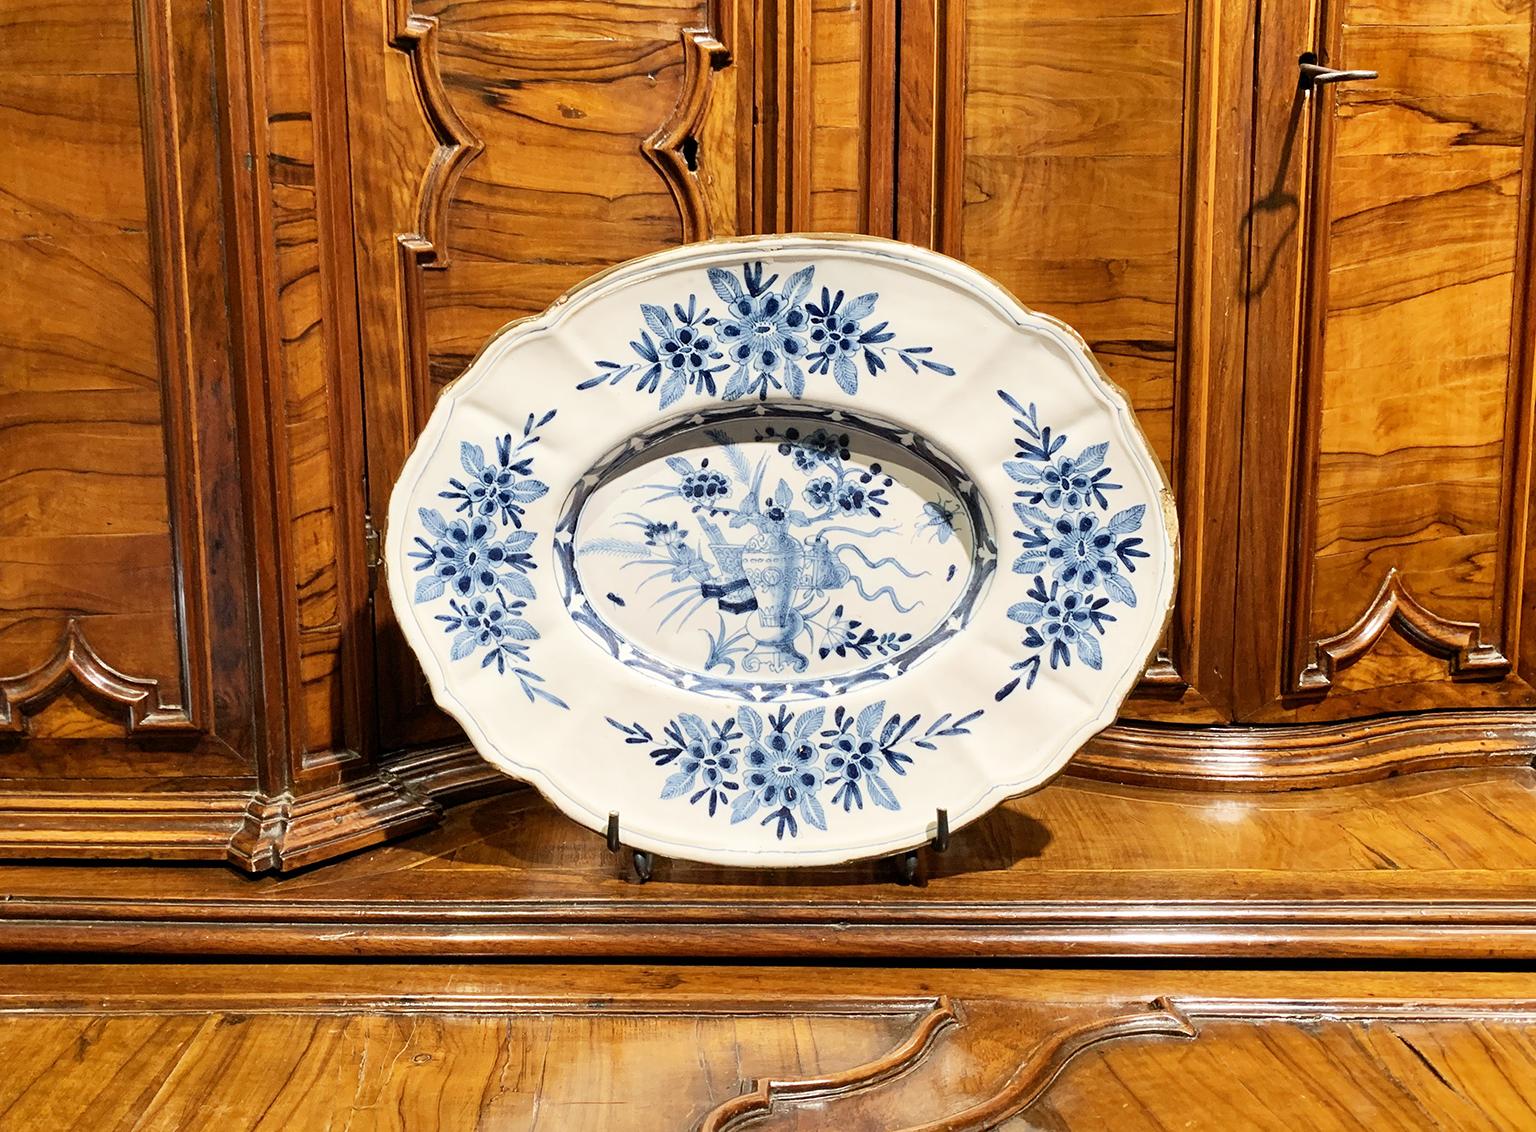 Maiolica Oval Tray, Felice Clerici Manufactory, Milan, Circa 1770-1780 For Sale 7